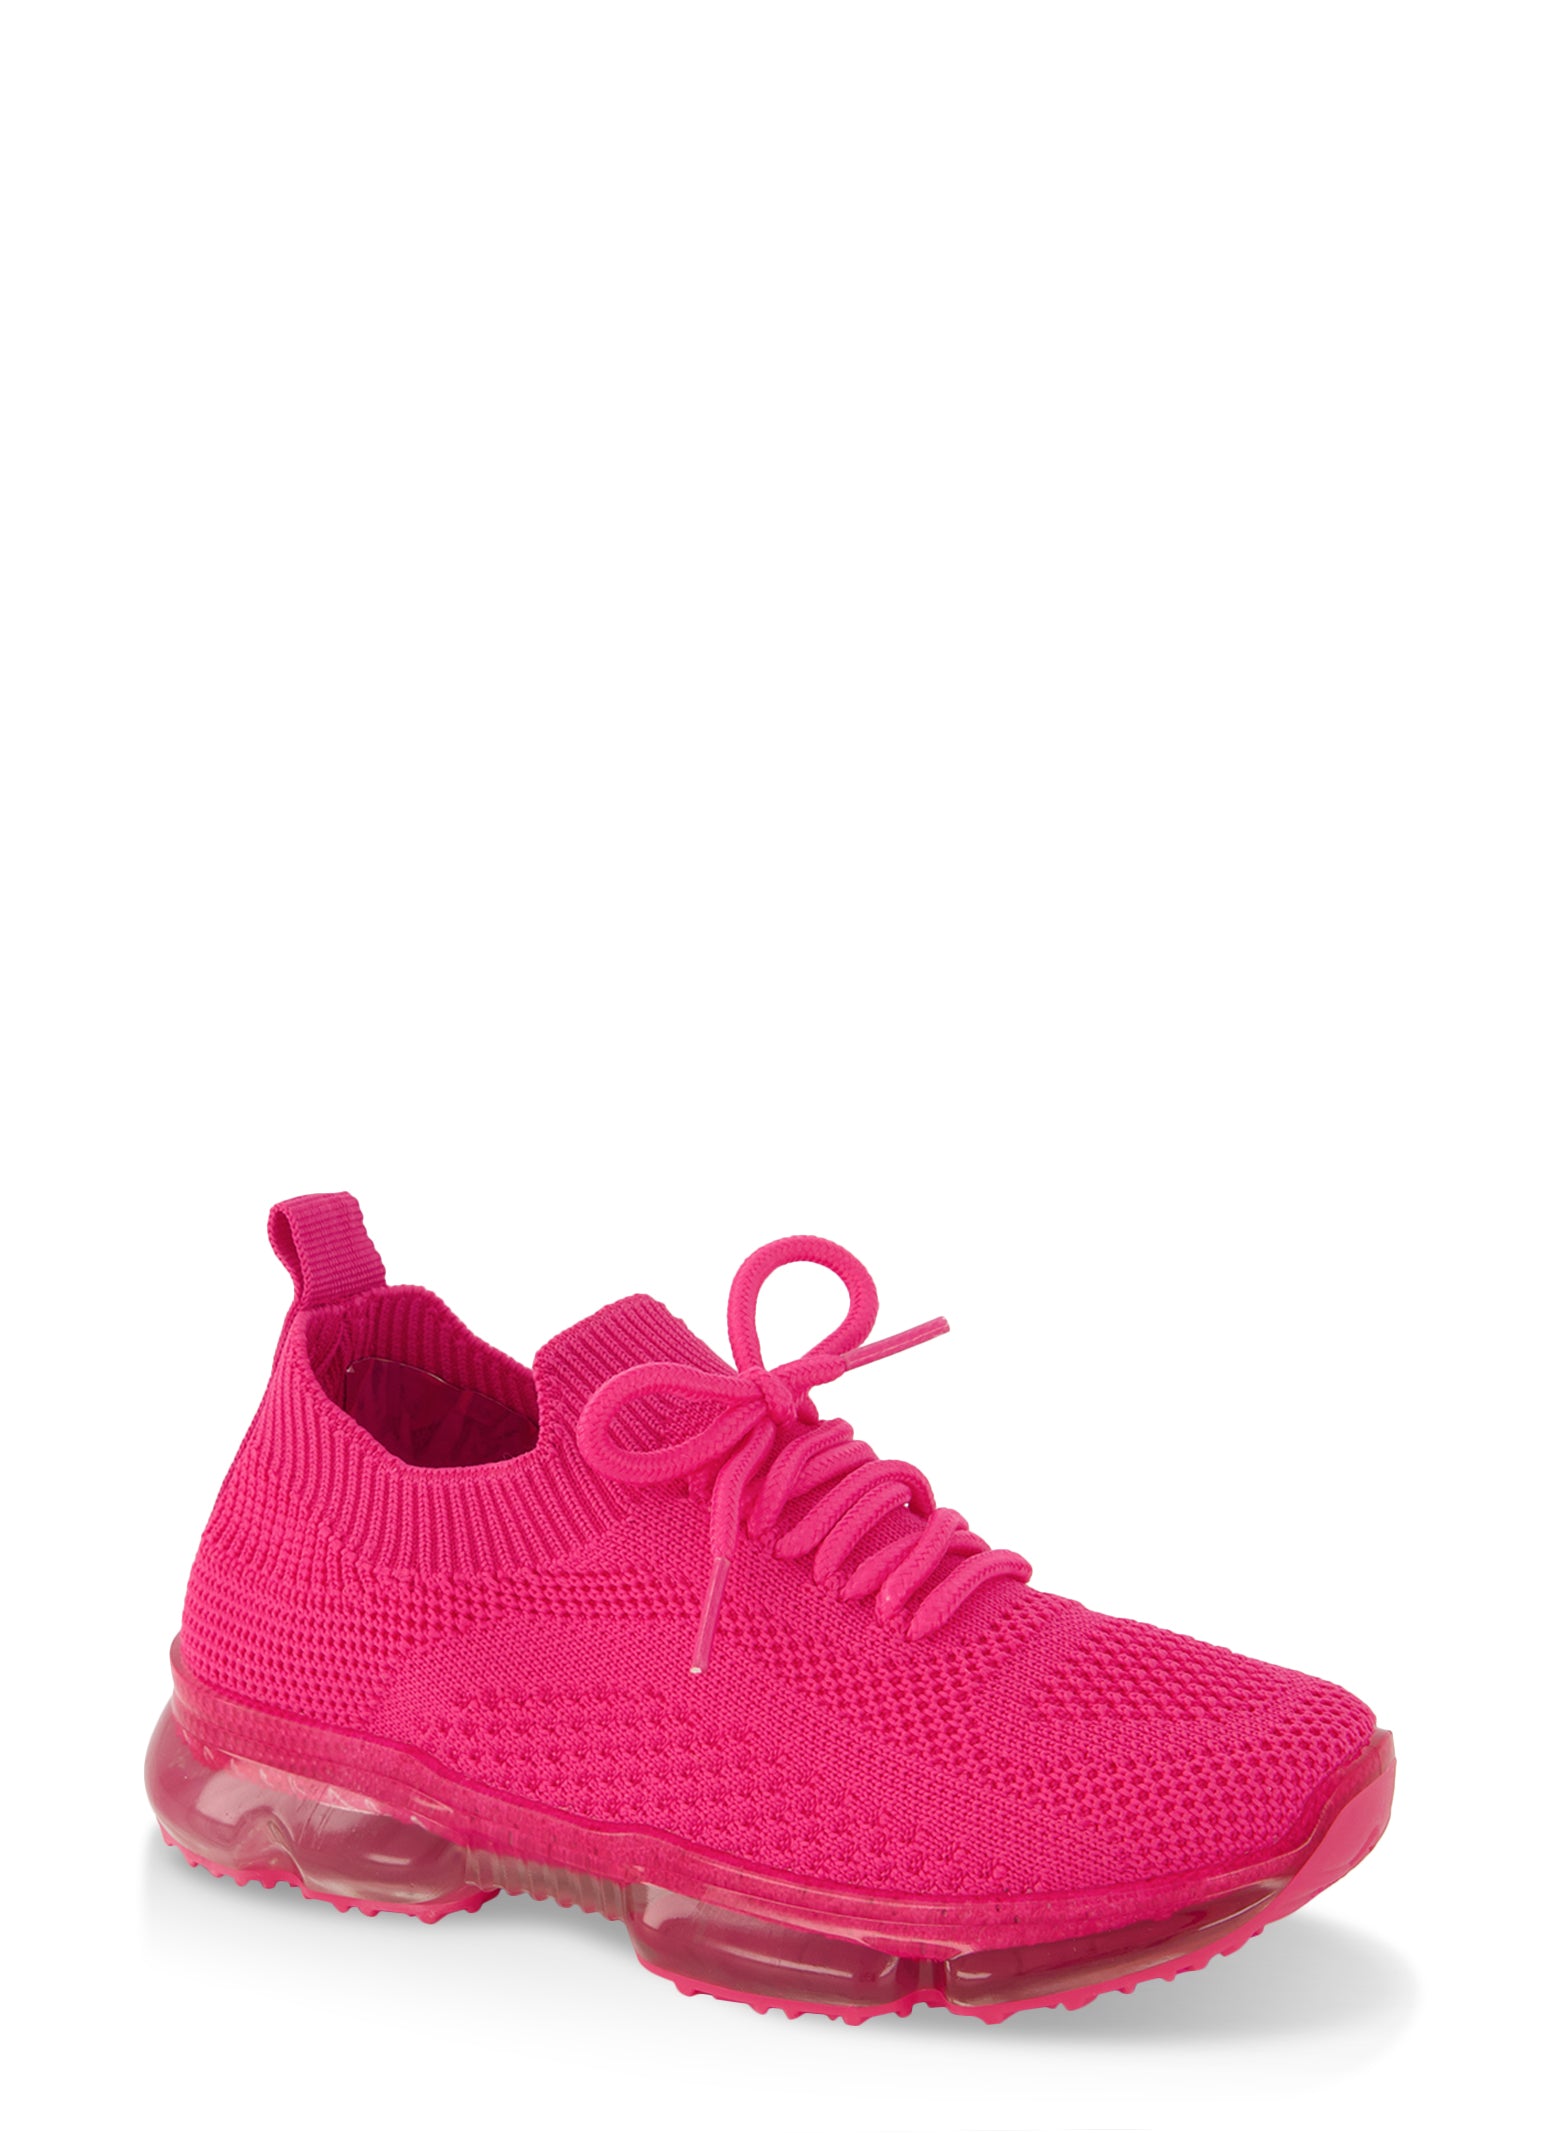 Girls Bubble Sole Textured Knit Sneakers